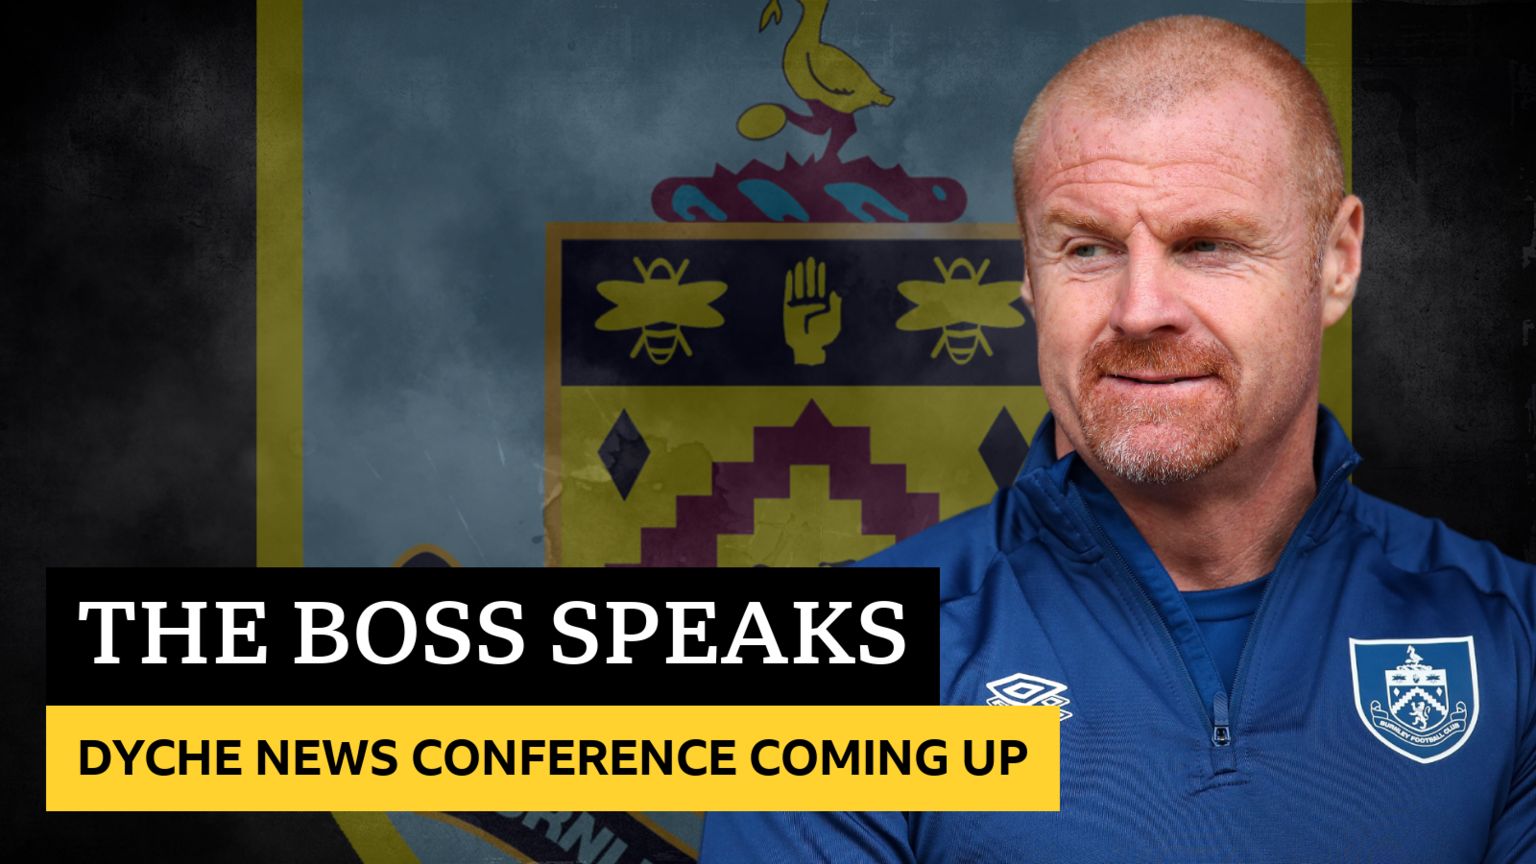 Sean Dyche news conference coming up